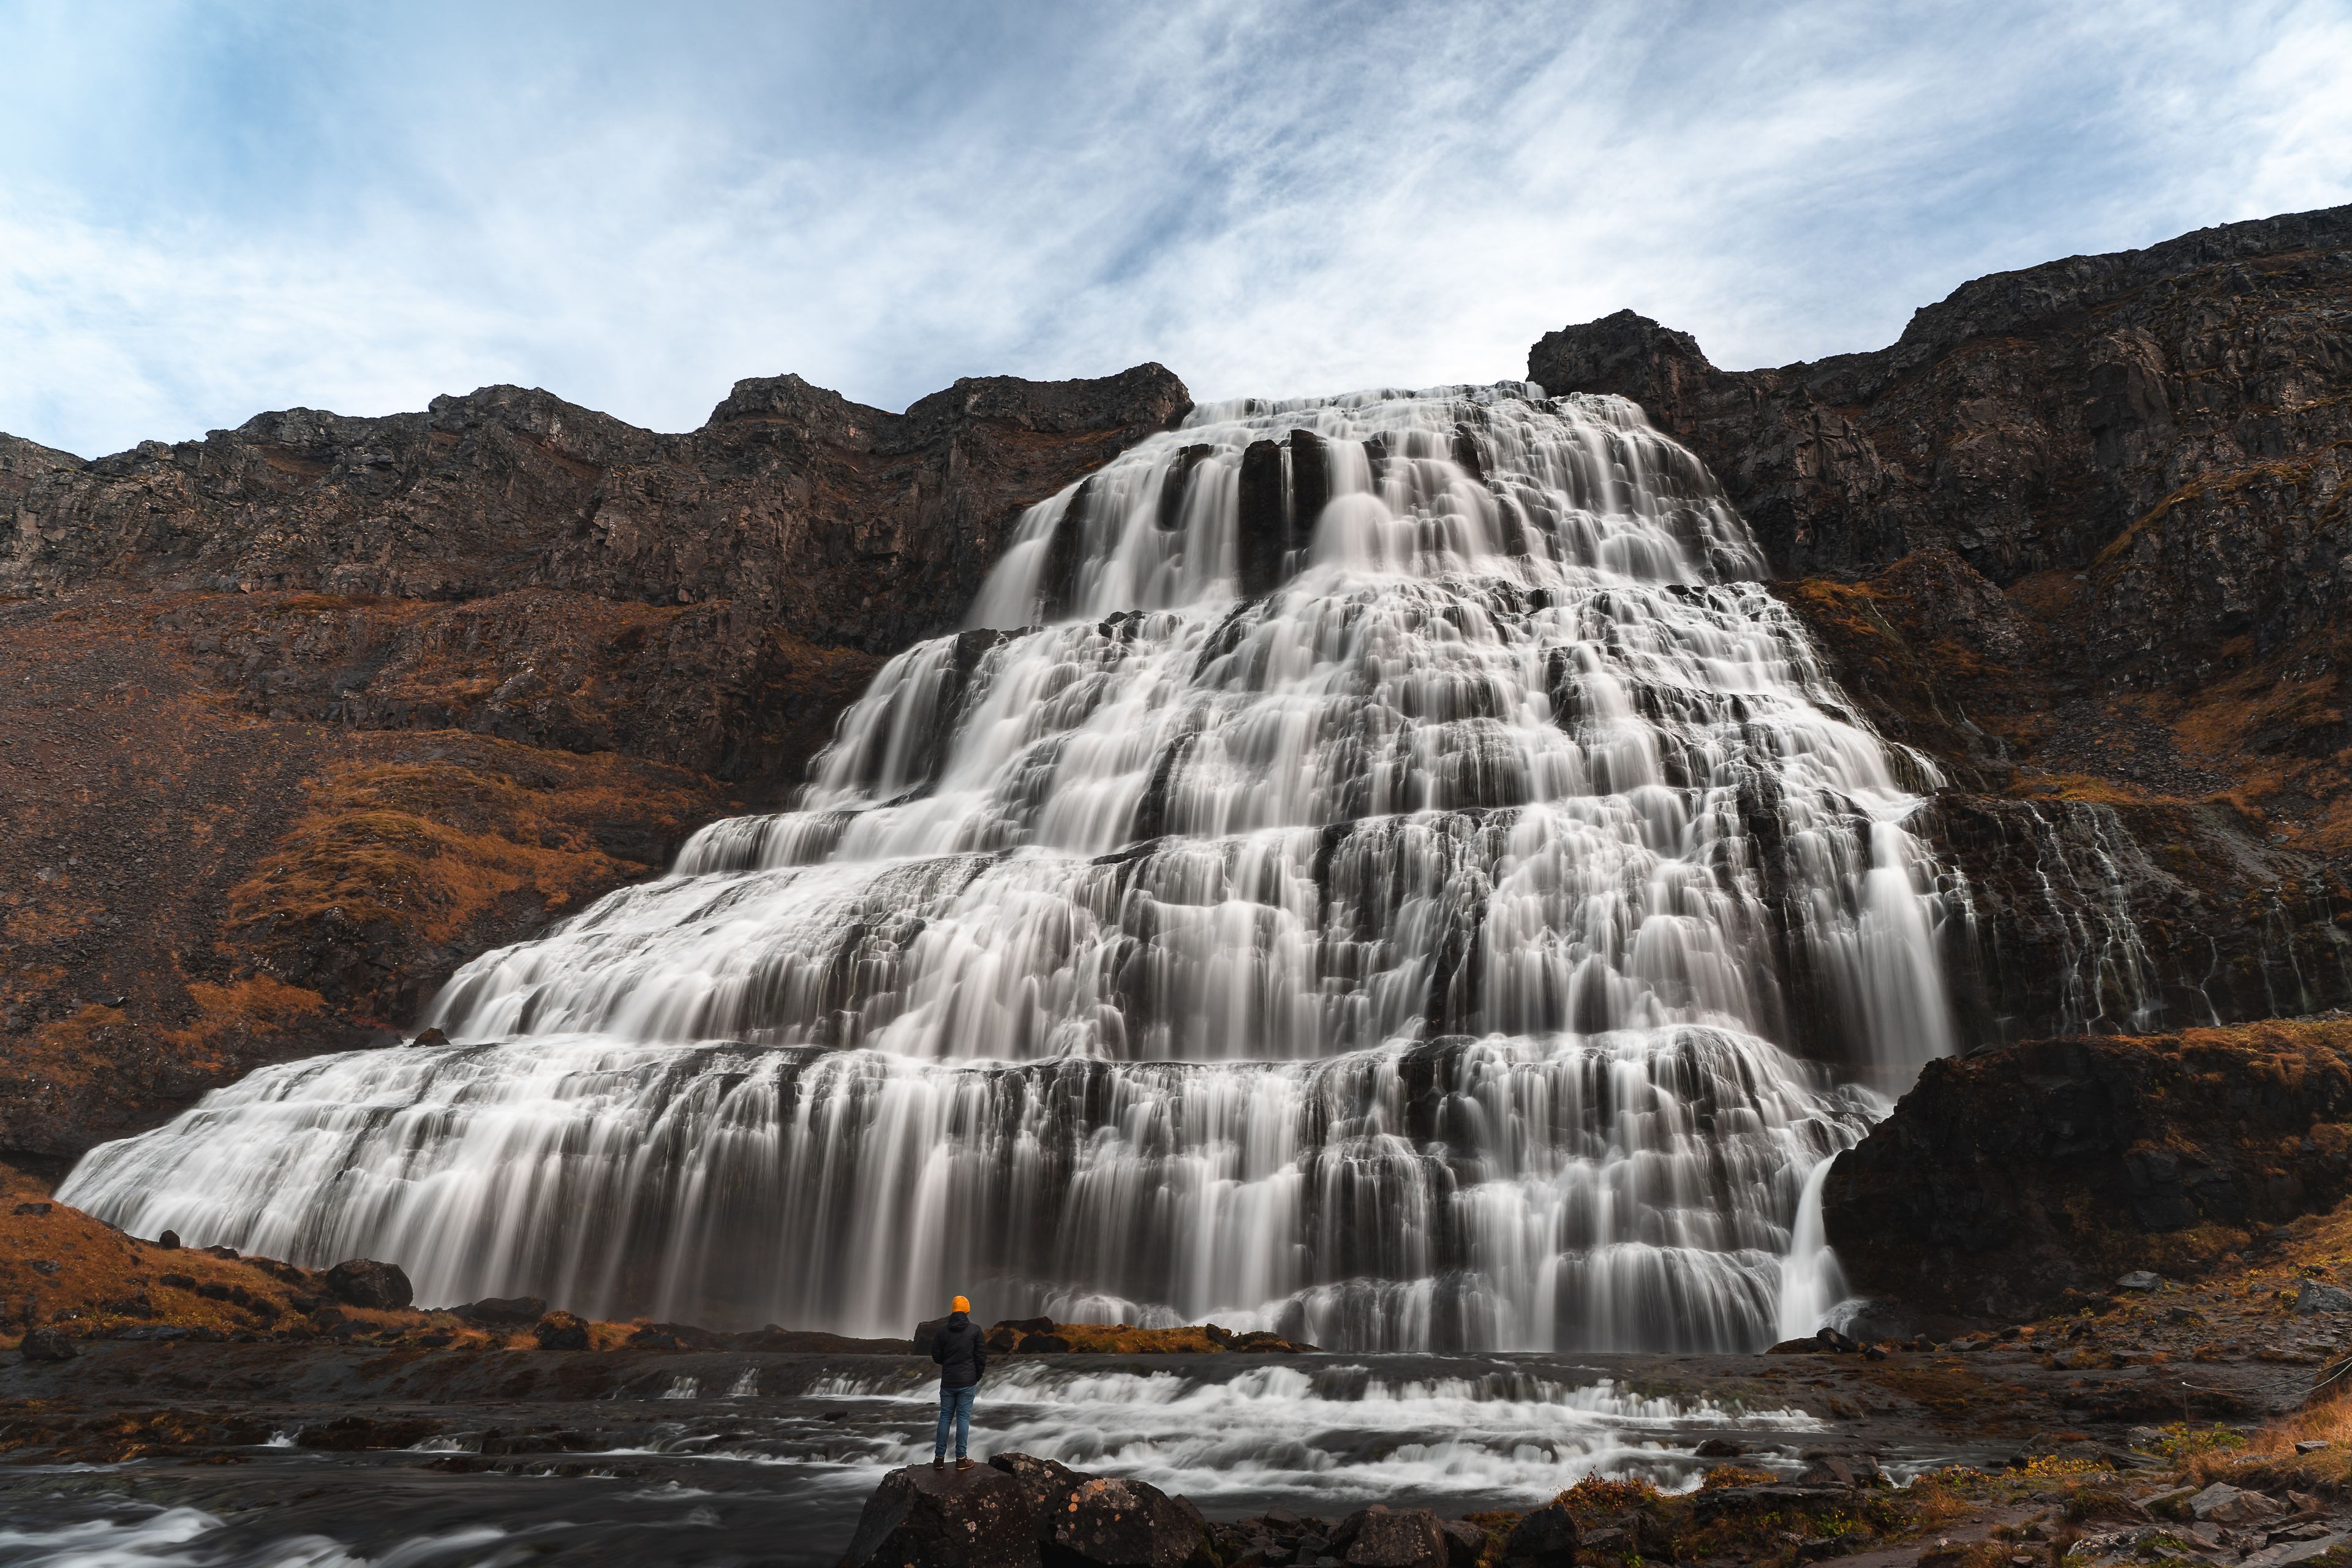 A person impressed by the huge Dynjandi waterfall in Iceland